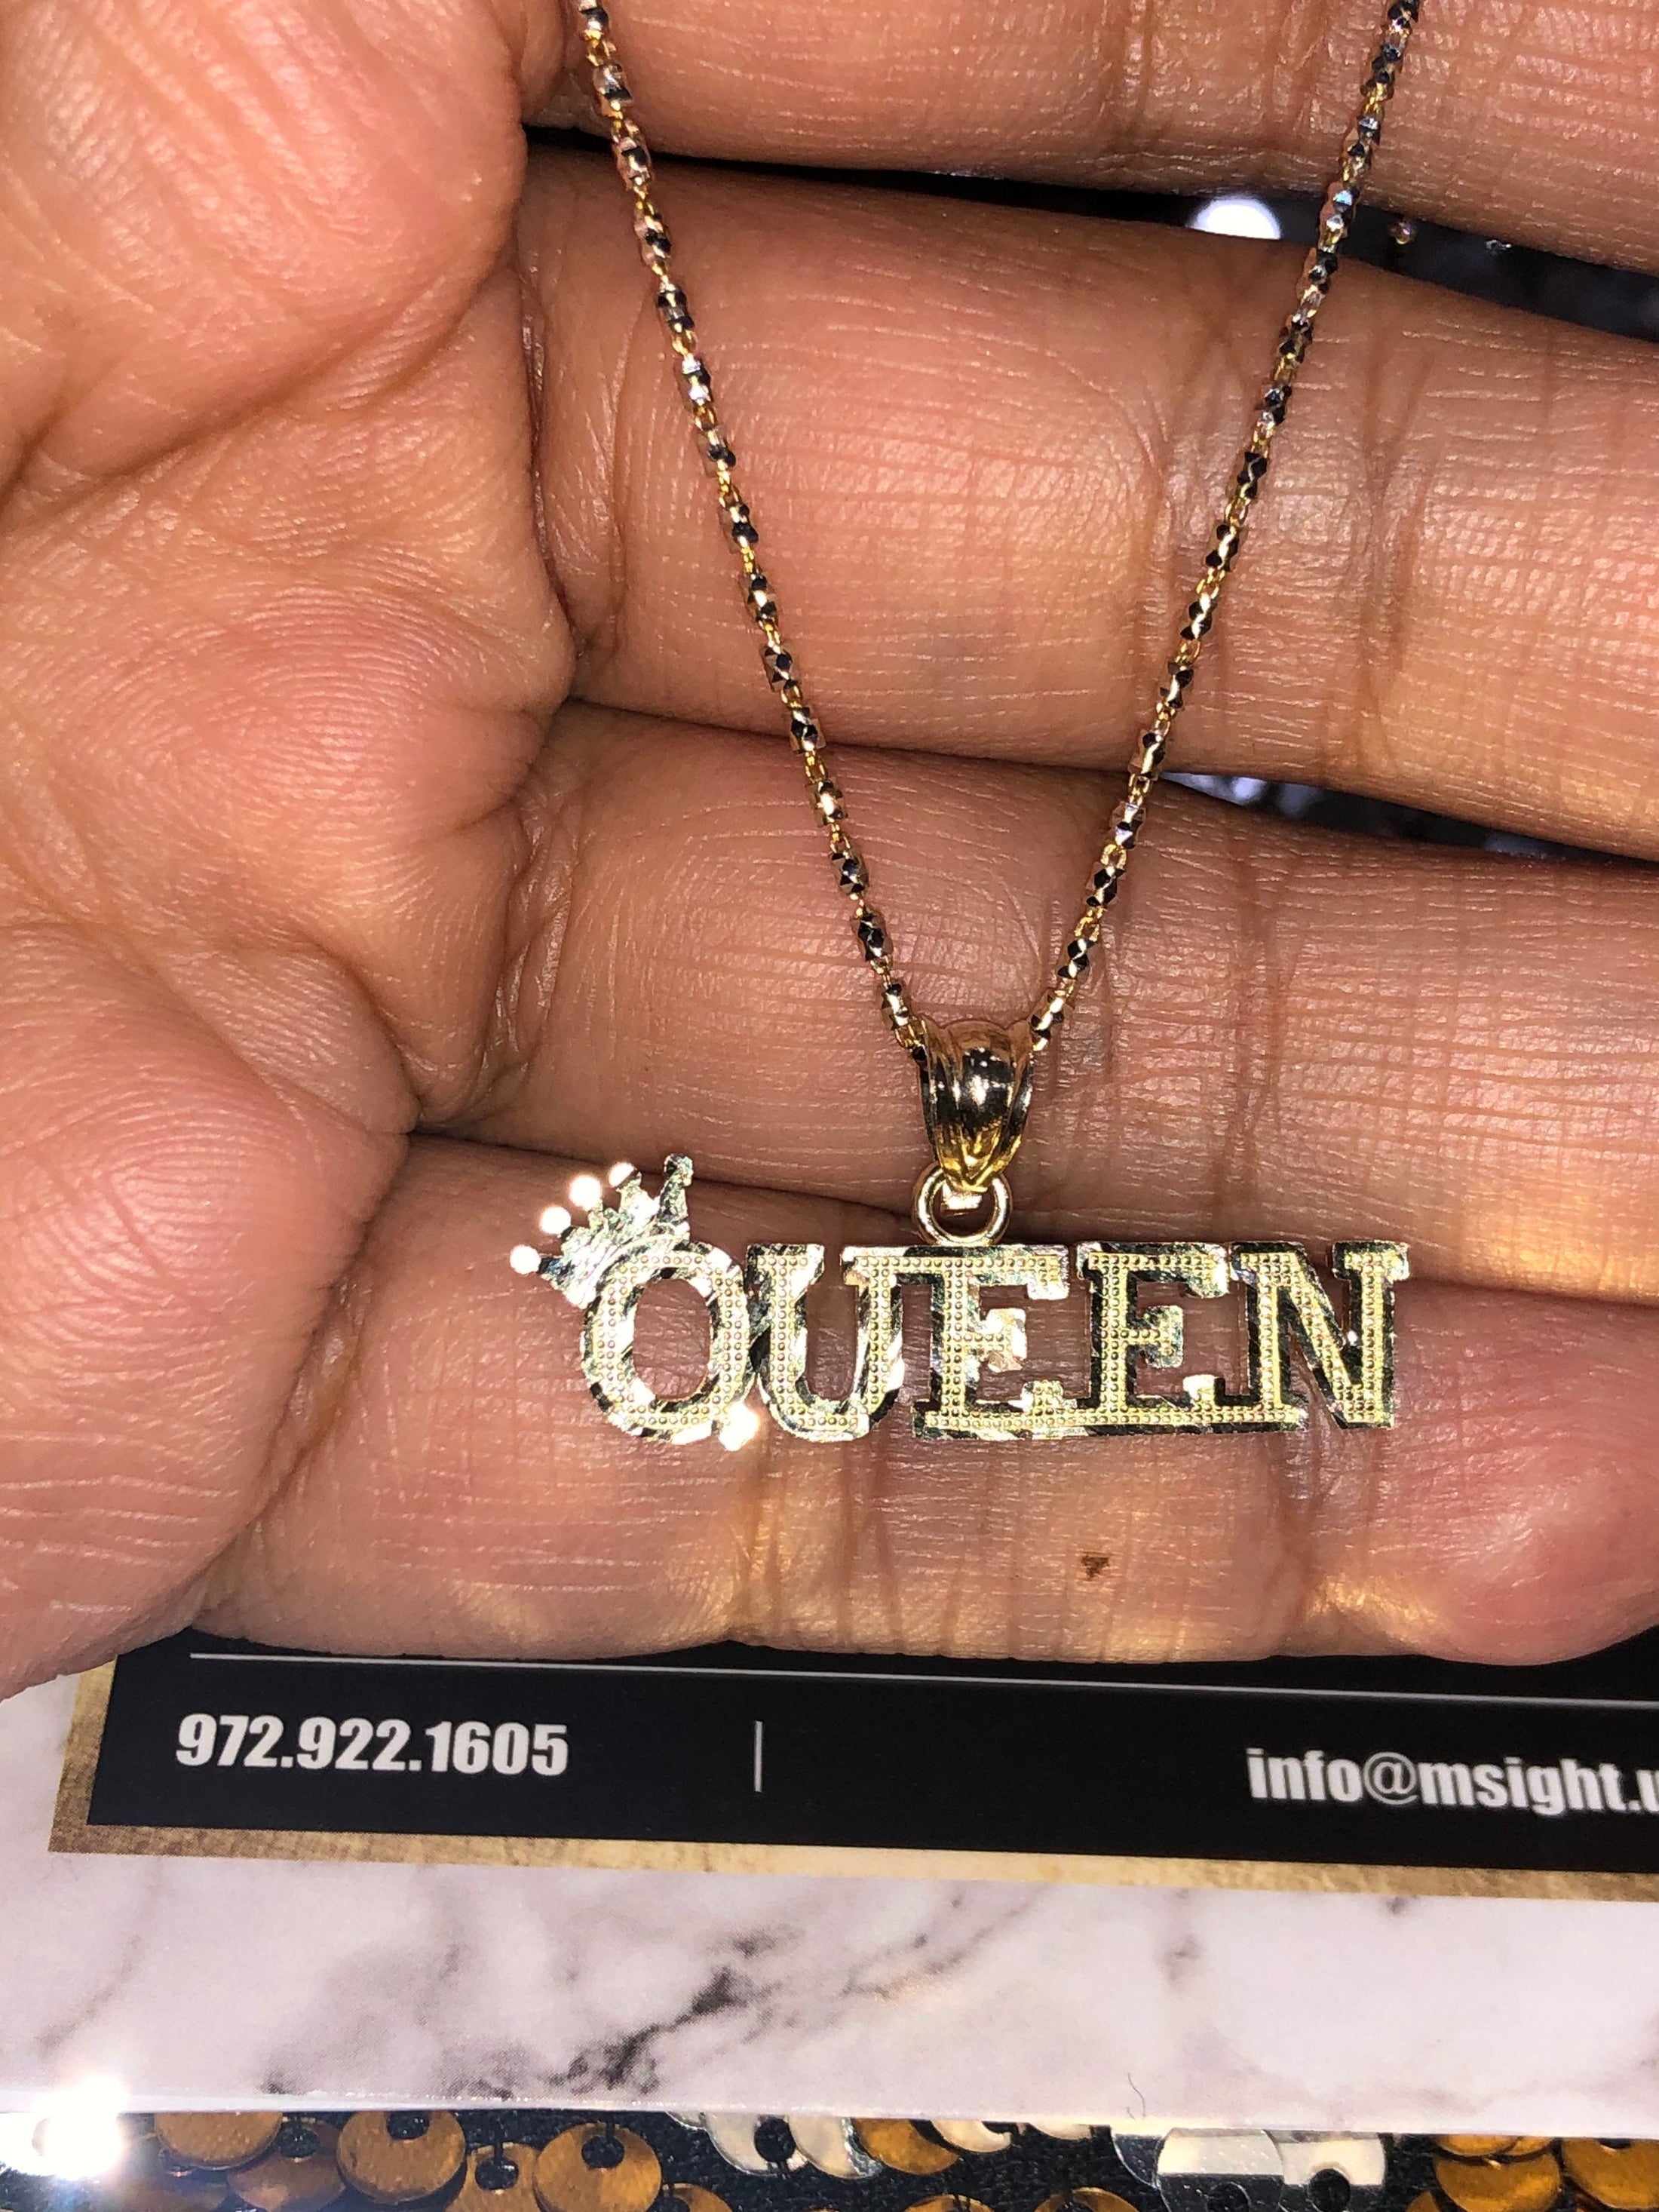 10k solid gold NOT PLATED queen pendant charm necklace, real gold, gift for her, anniversary present, birthday gift, wedding, engagement